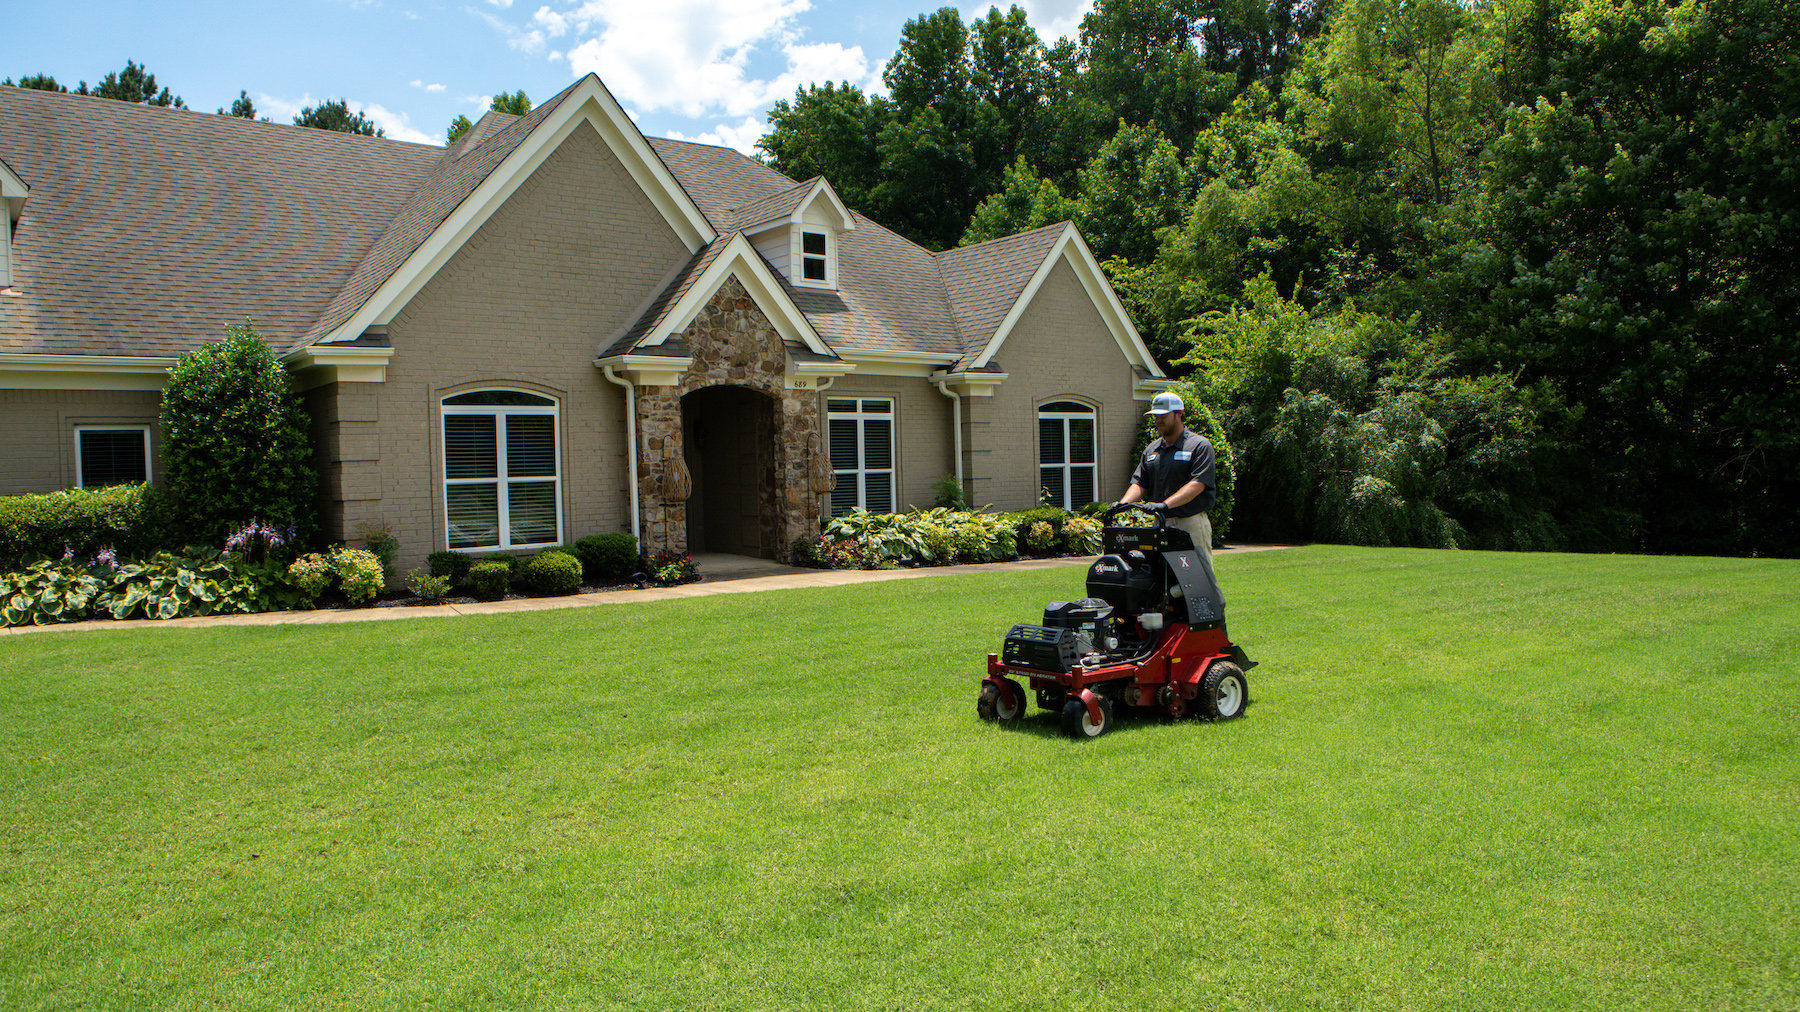 Perform lawn aeration before overseeding